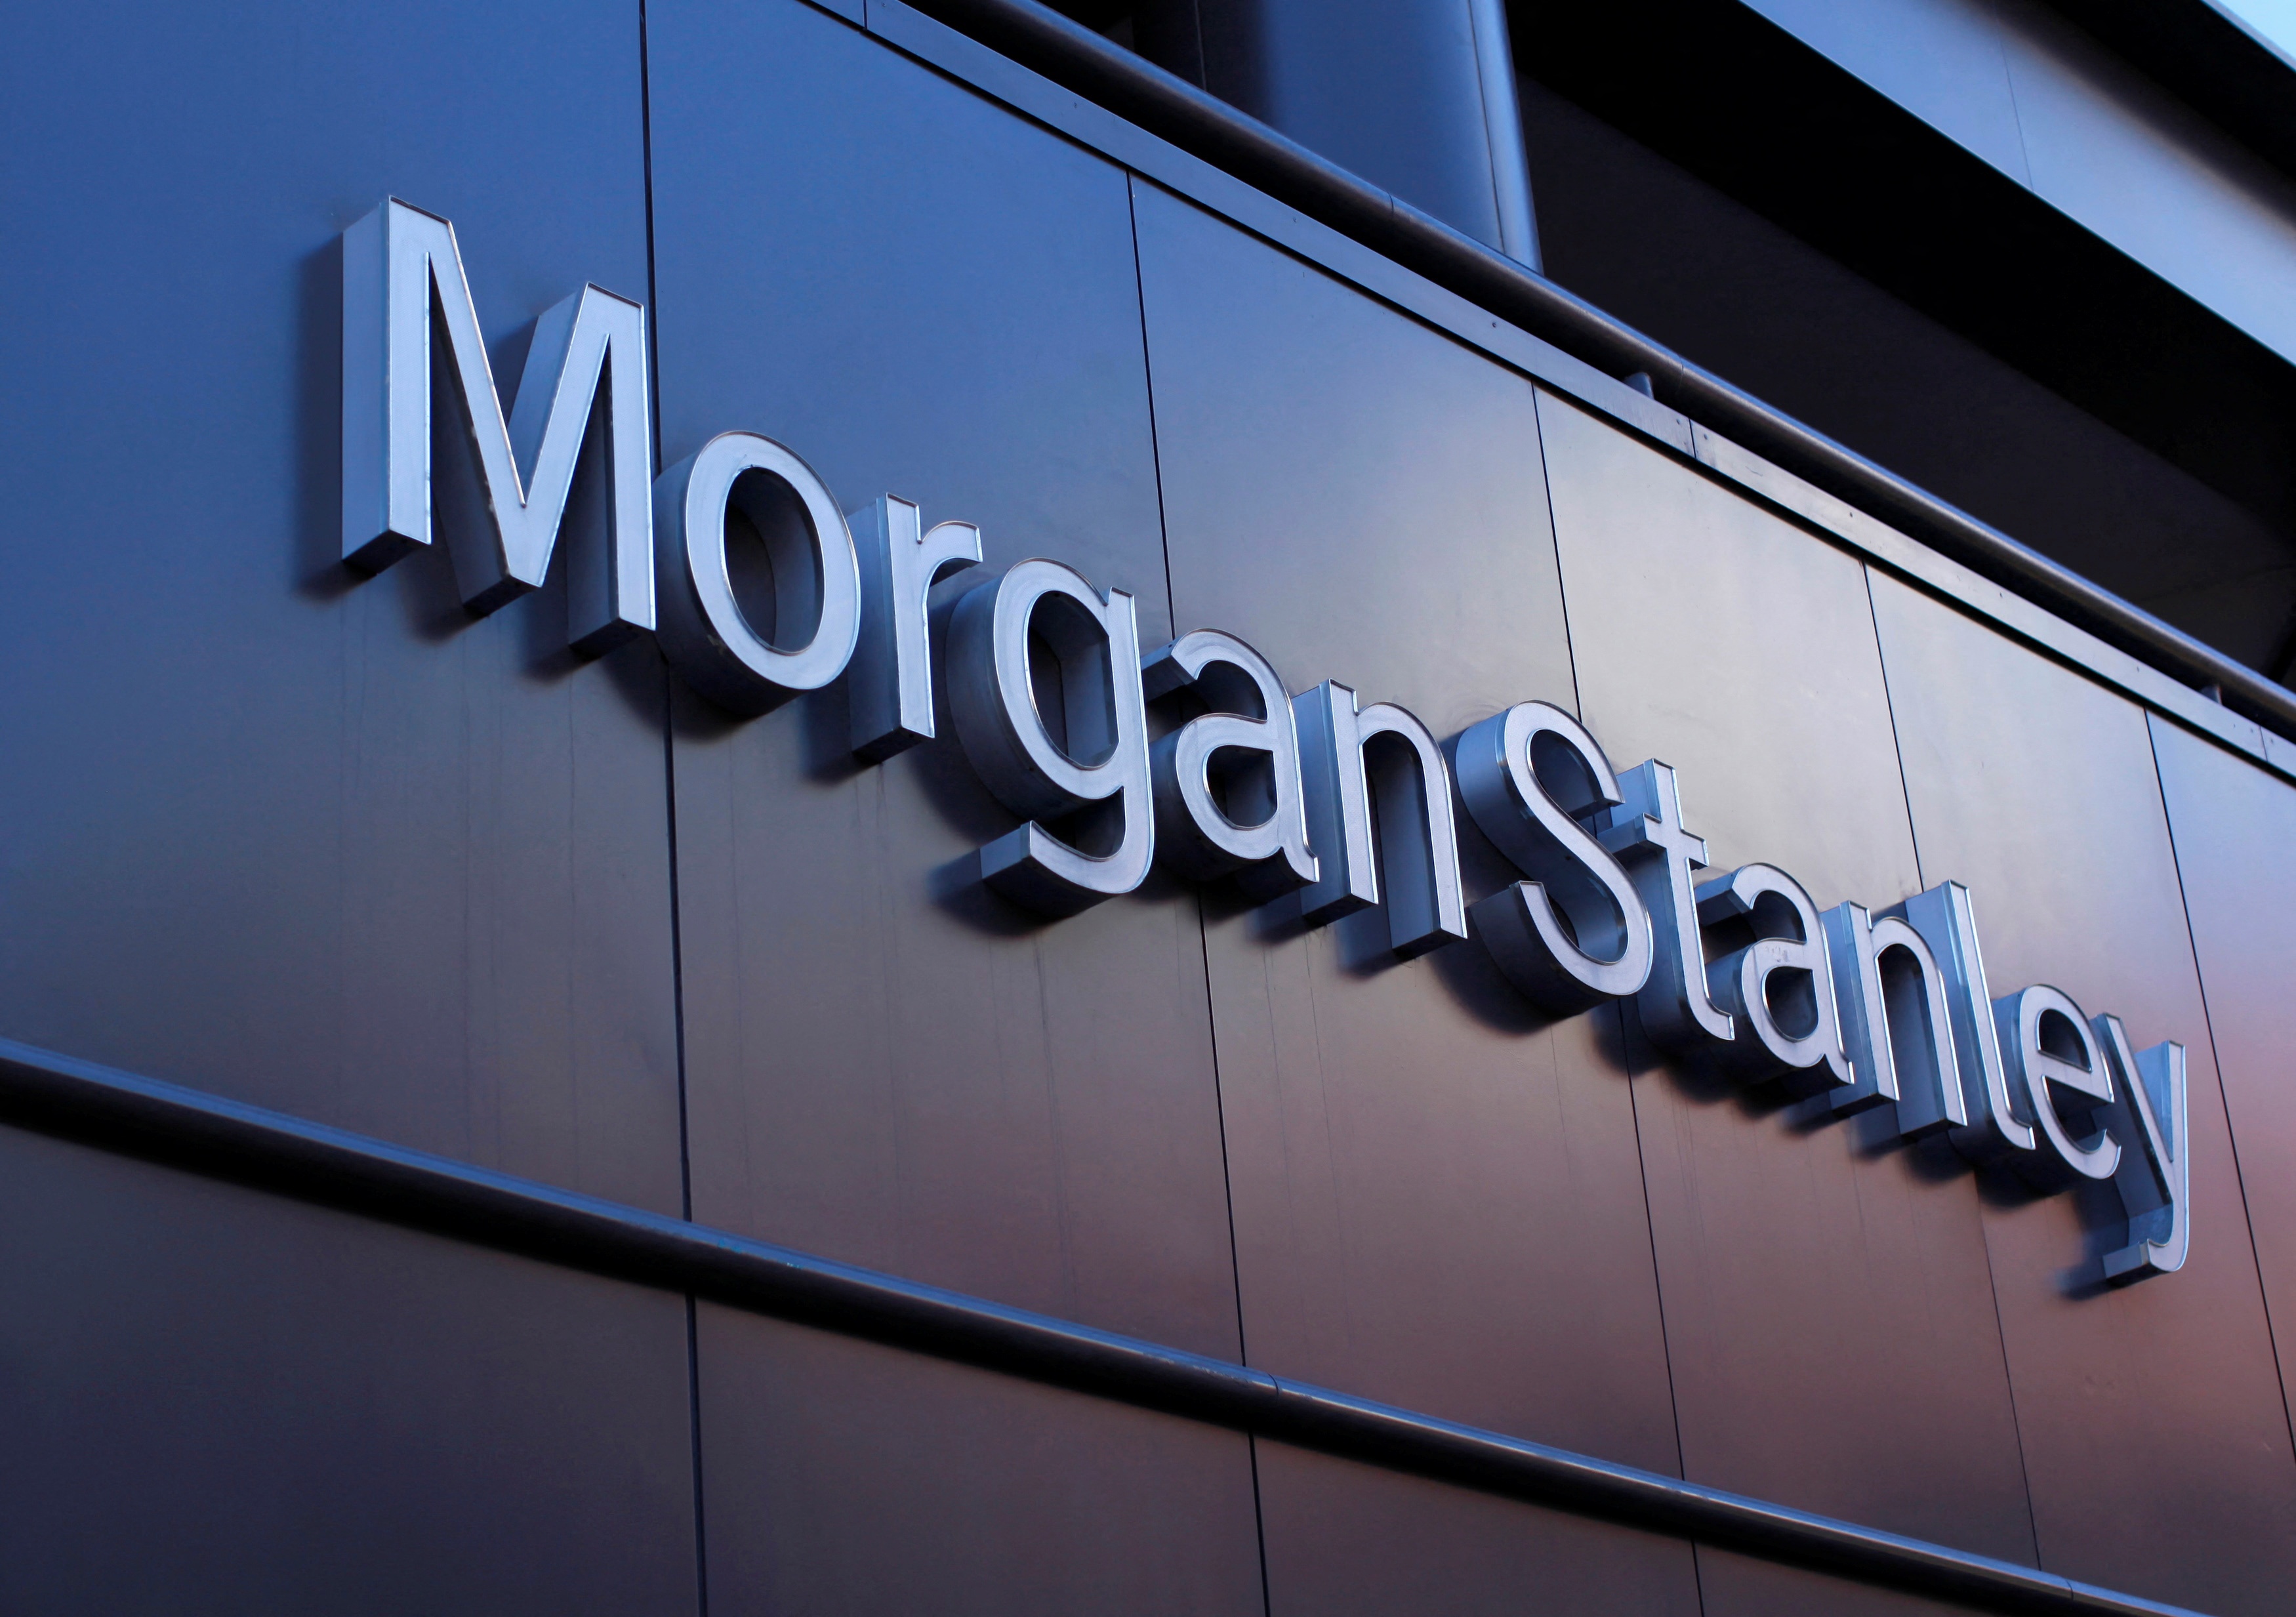 Morgan Stanley: AIPC may capture over 60% market share